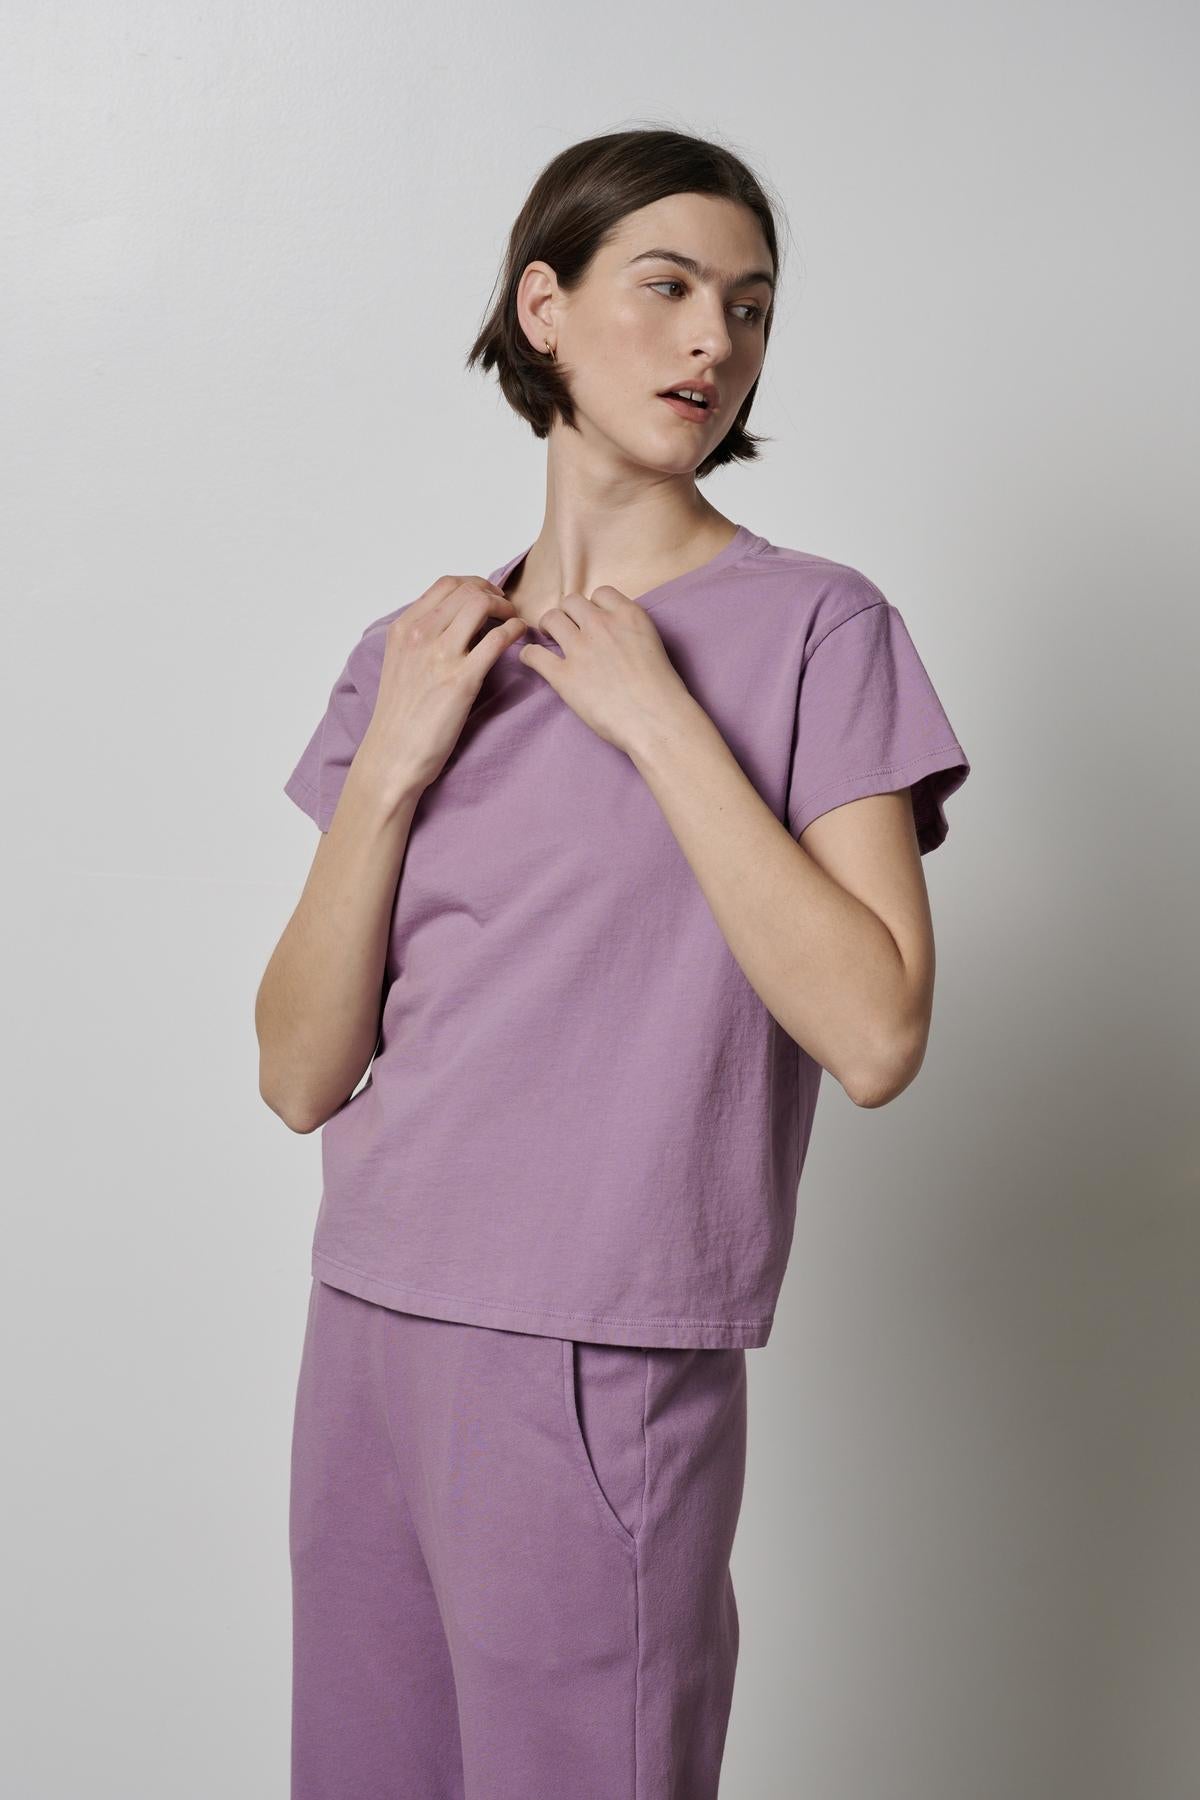 The model is wearing a purple Velvet by Jenny Graham TOPANGA TEE and pants.-35783186710721